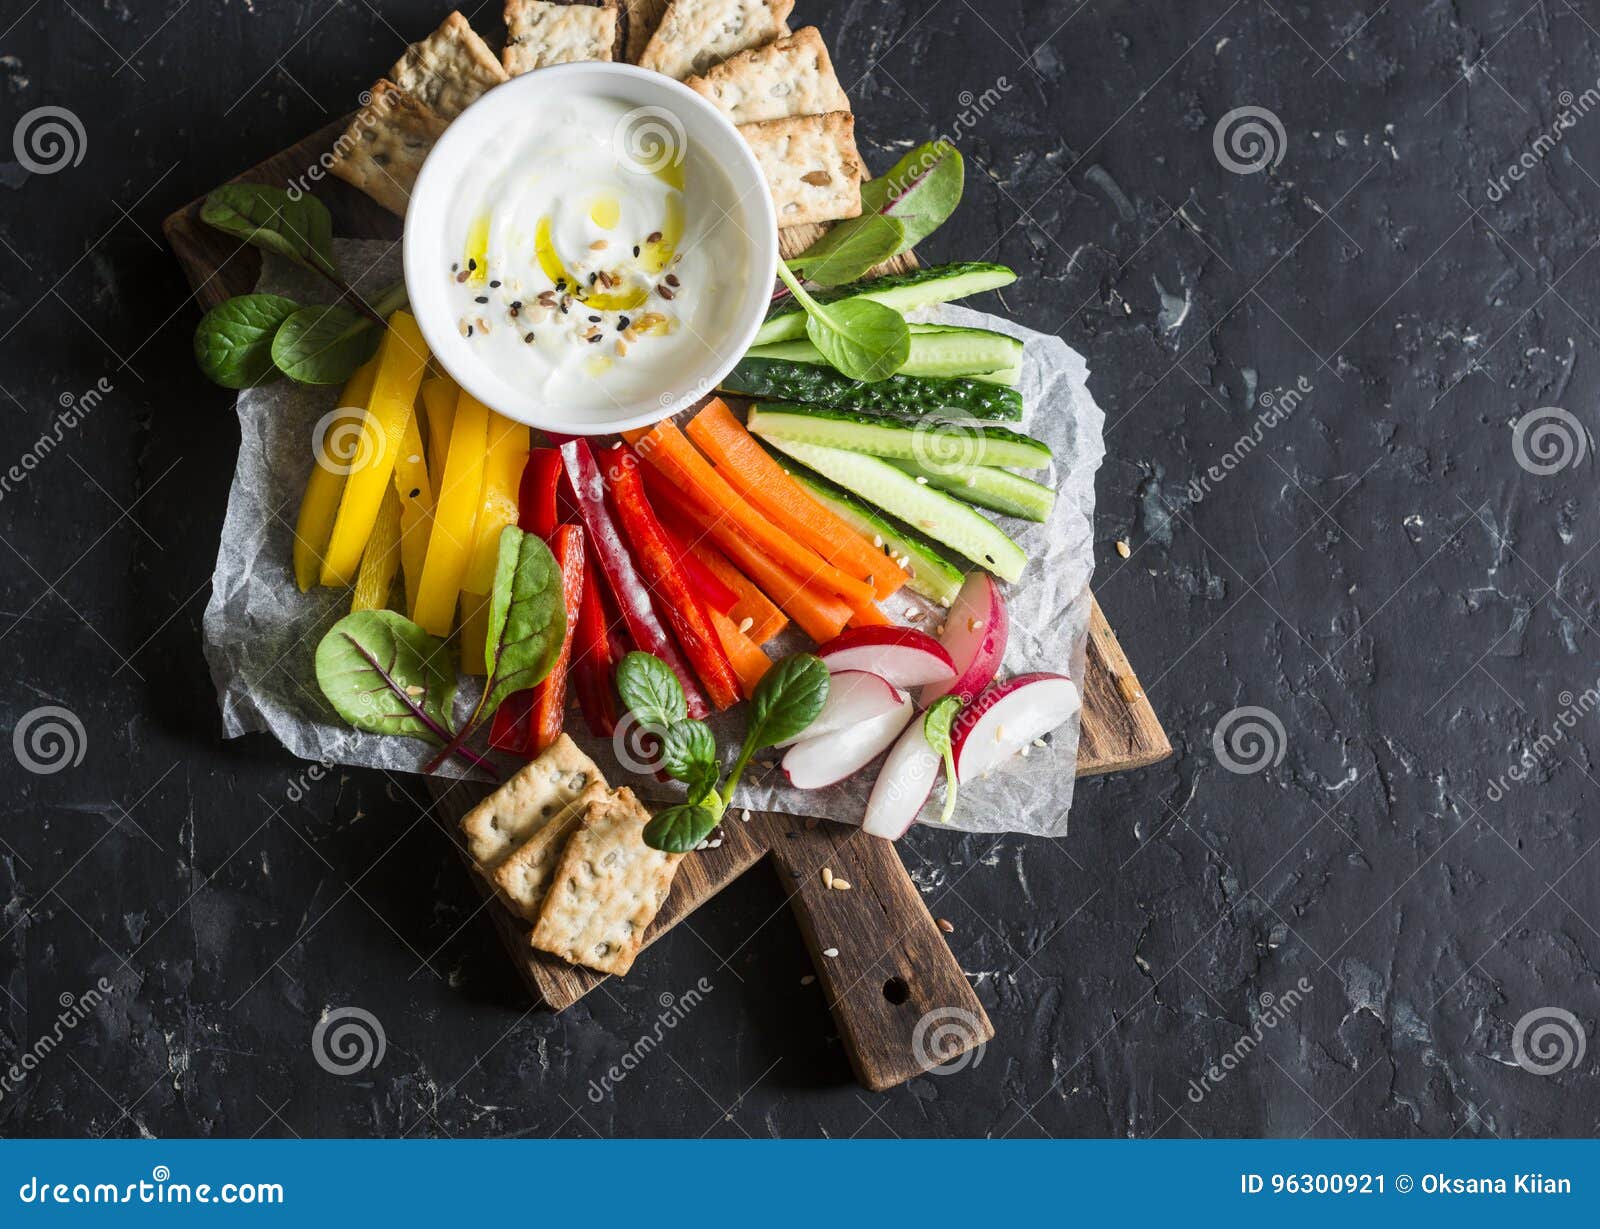 healthy snack - raw vegetables and yogurt sauce on a wooden cutting board, on a dark background, top view. vegetarian healthy food